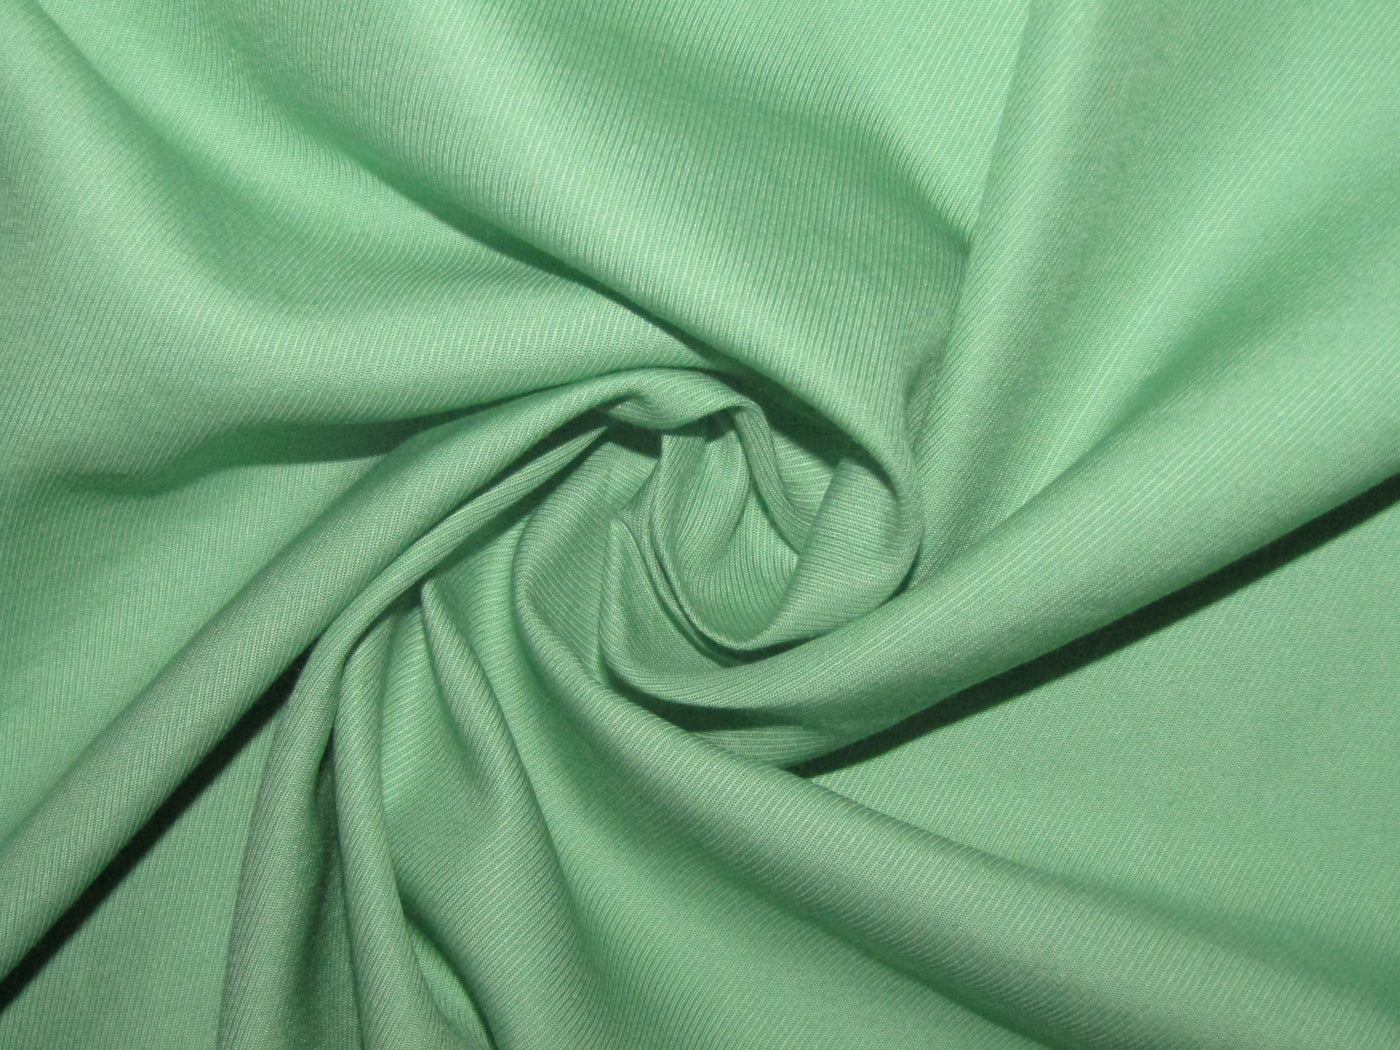 SUITING 100% TENCEL 350GRAMS/ 280GSM MADE IN INDIA 58" available in green/lilac/teal/rose pink and white ivory [15404-15409]